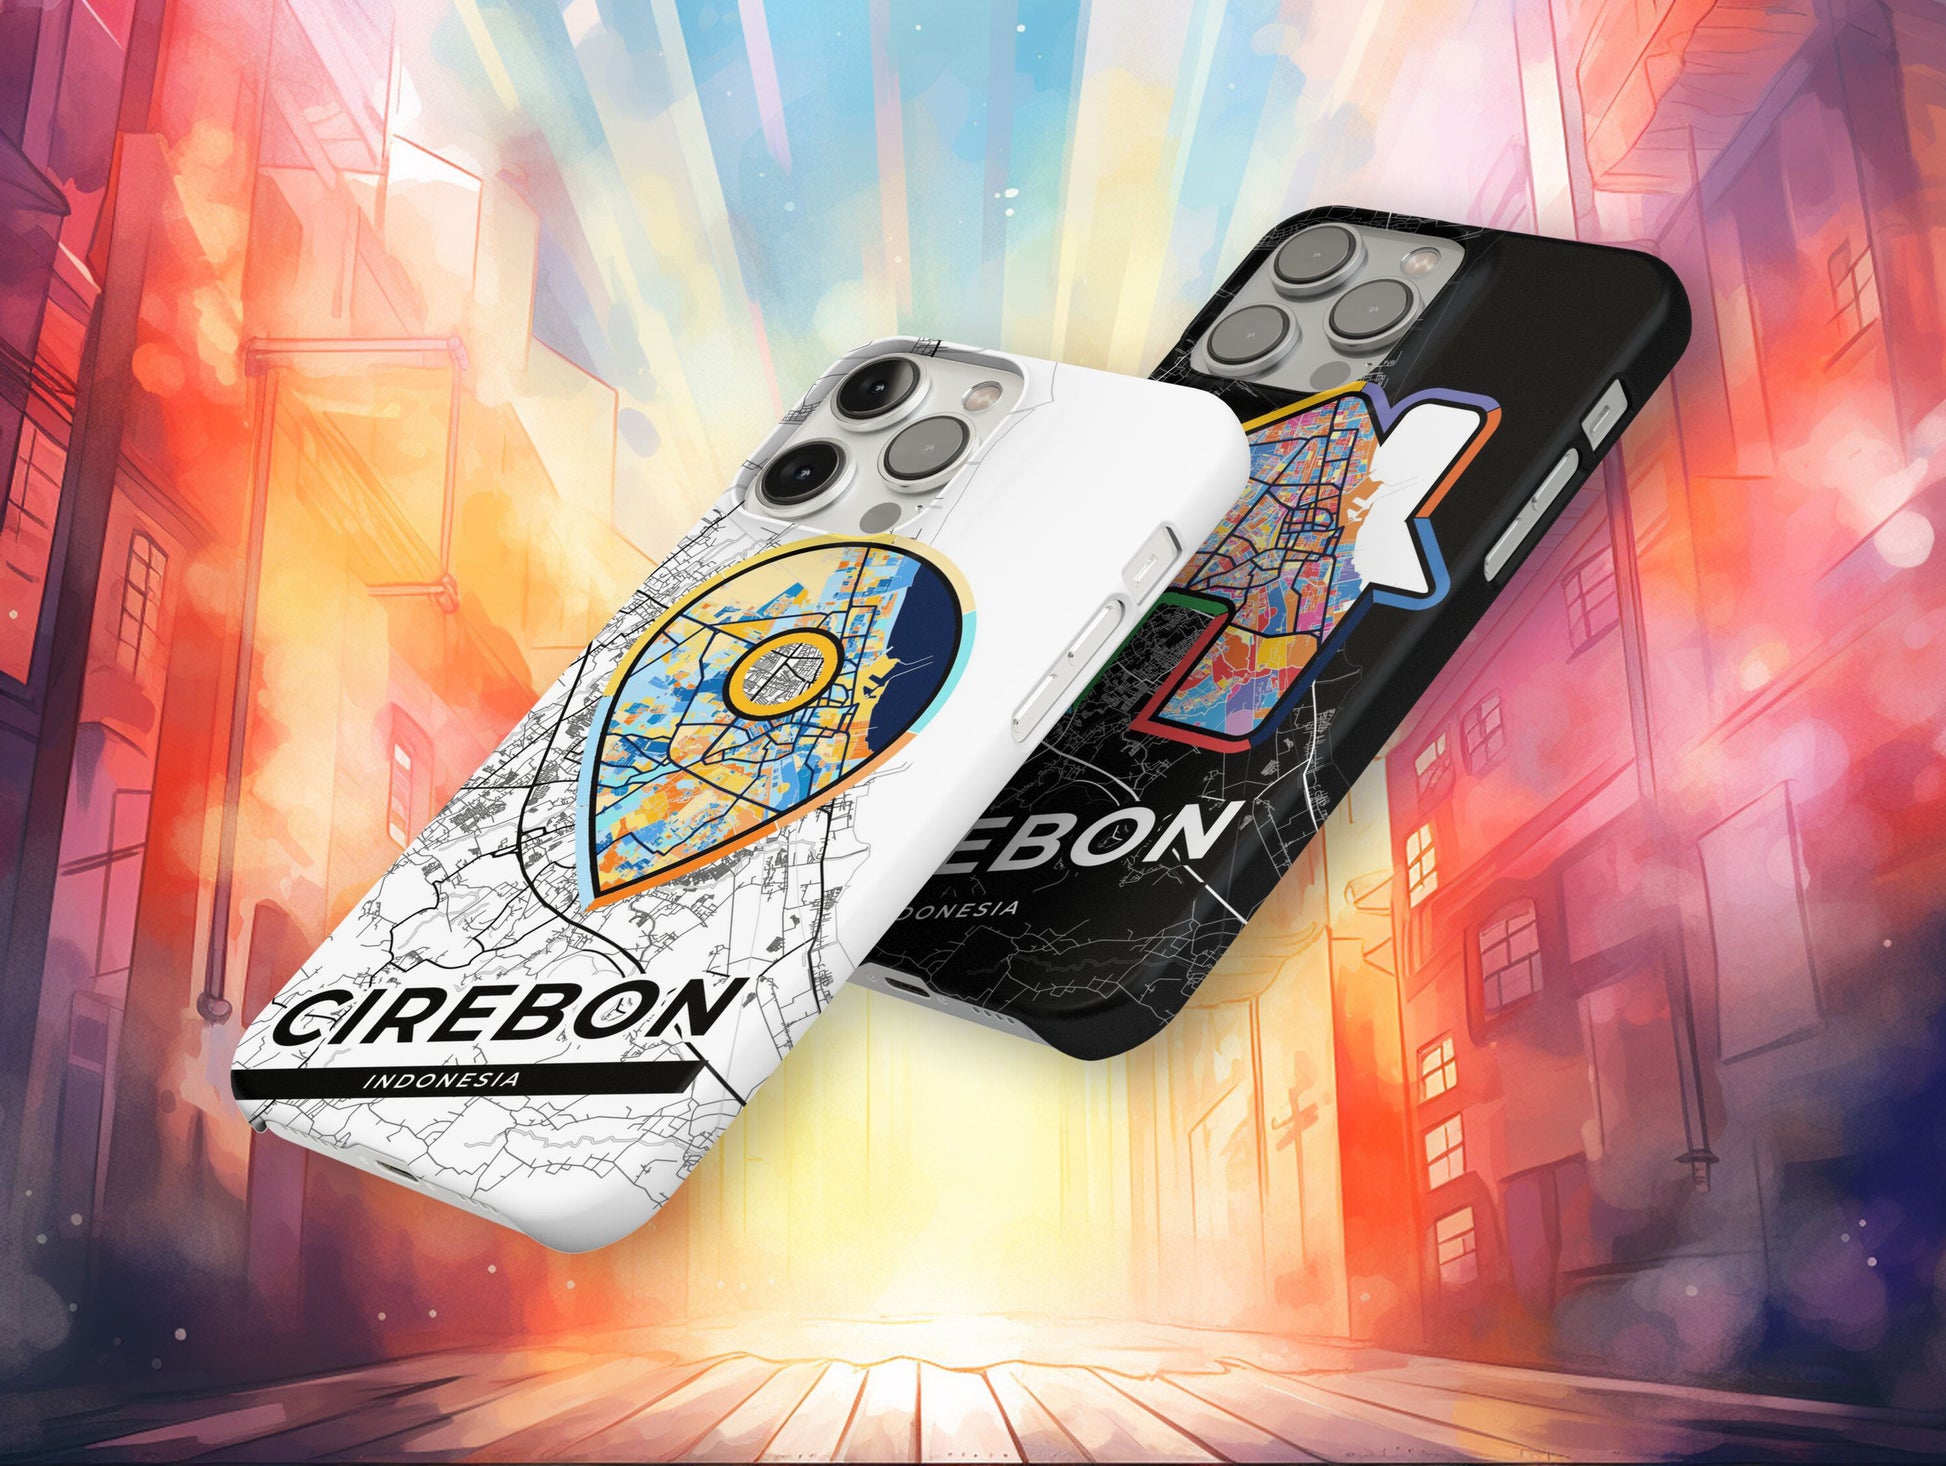 Cirebon Indonesia slim phone case with colorful icon. Birthday, wedding or housewarming gift. Couple match cases.